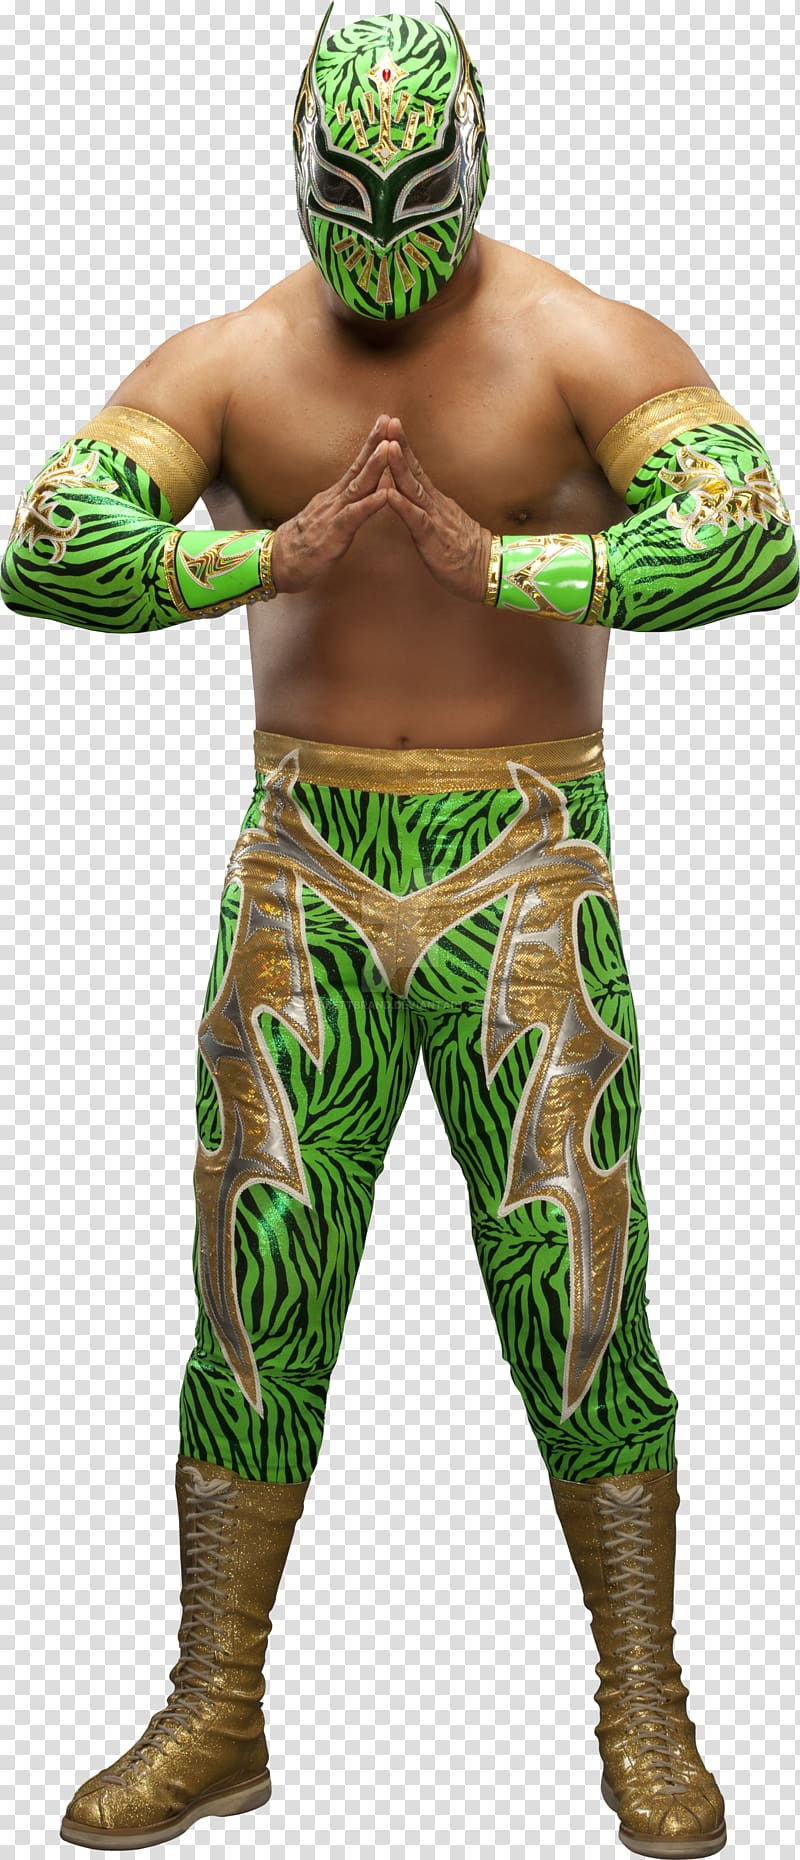 WWE \'13 WWE 2K14 Professional Wrestler Lucha libre Pin, Sin Cara transparent background PNG clipart